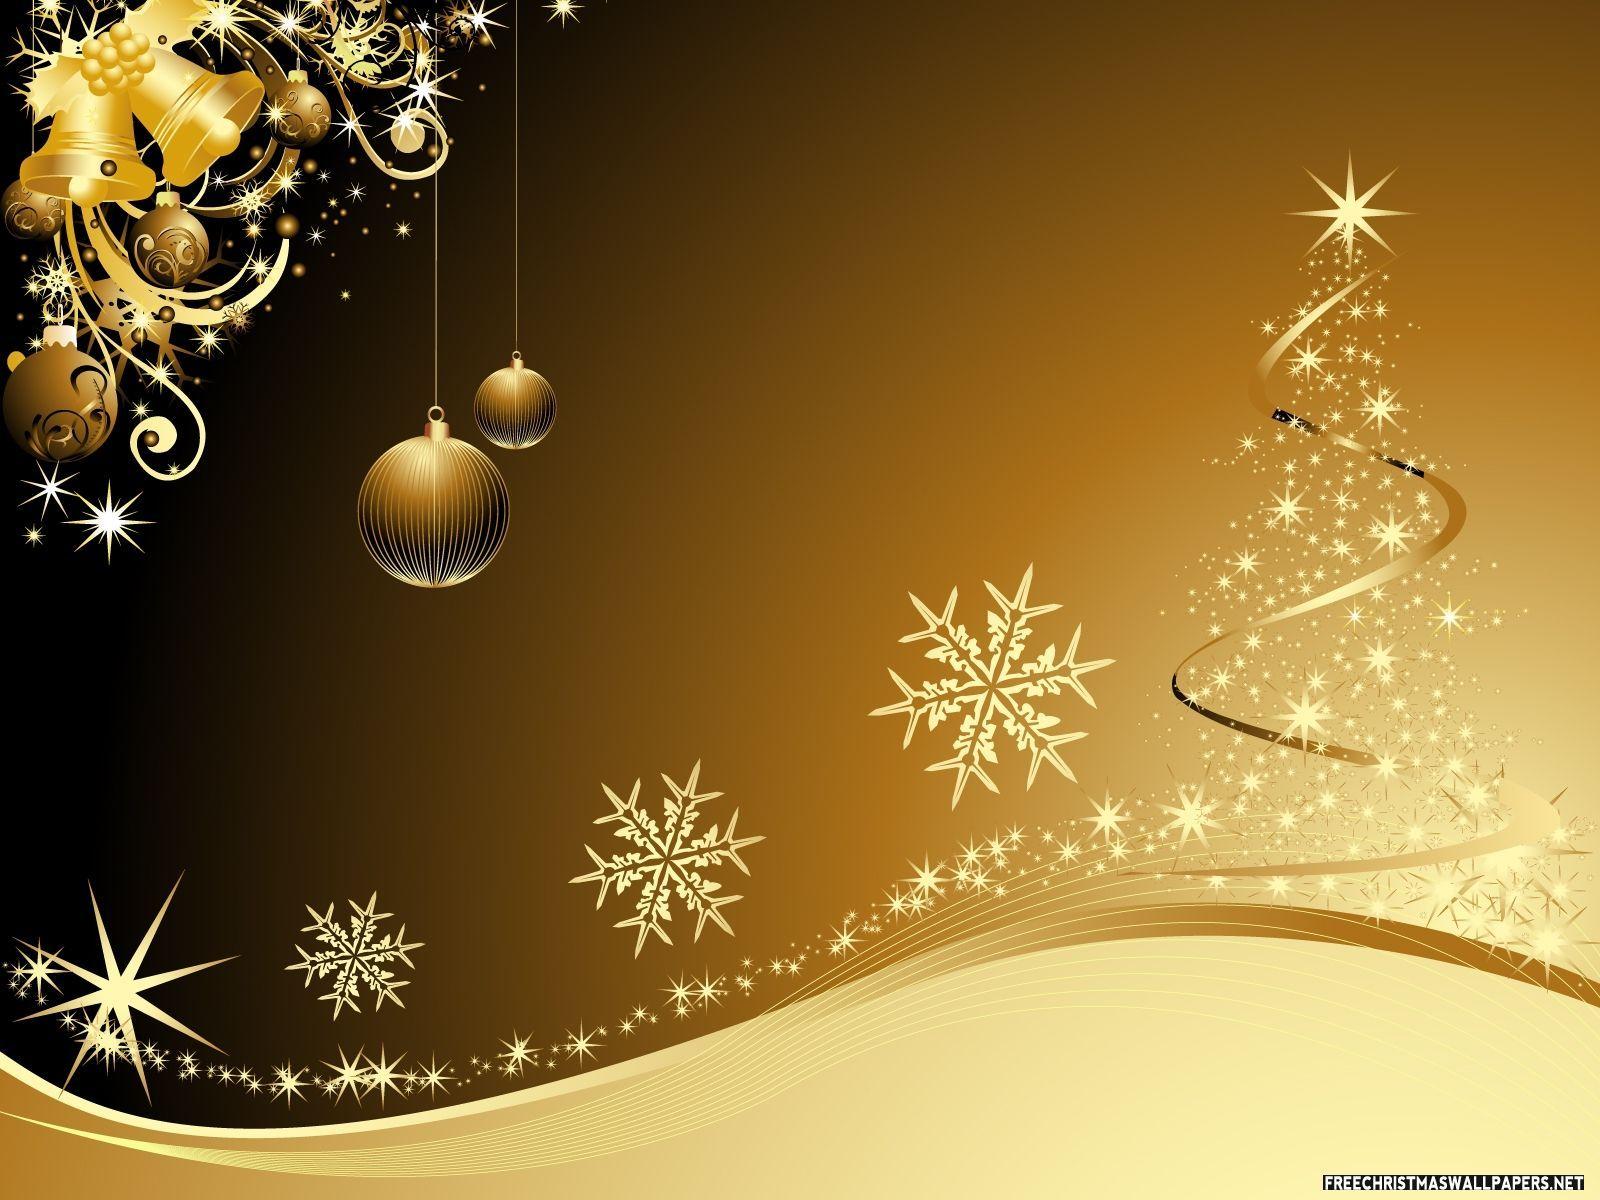 Gold Christmas Wallpapers Wallpaper Cave